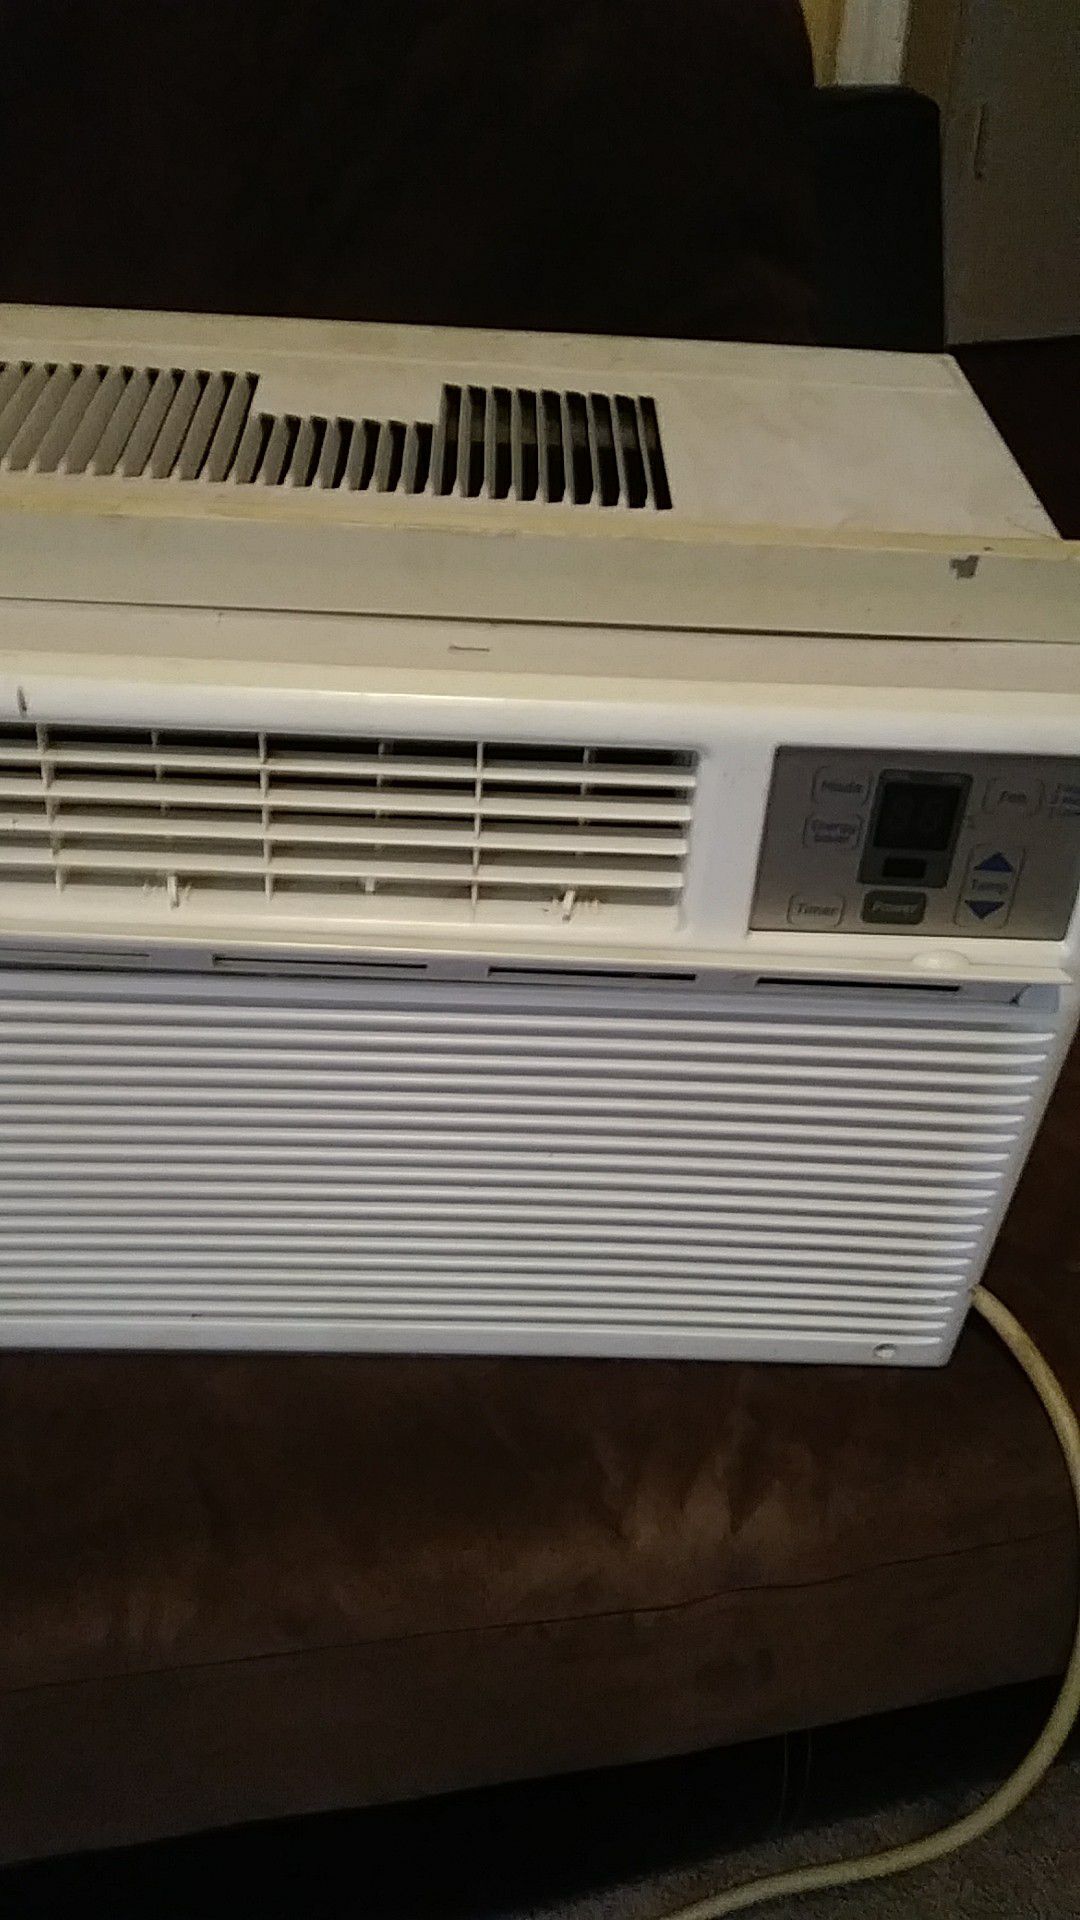 AC window unit blows out great air